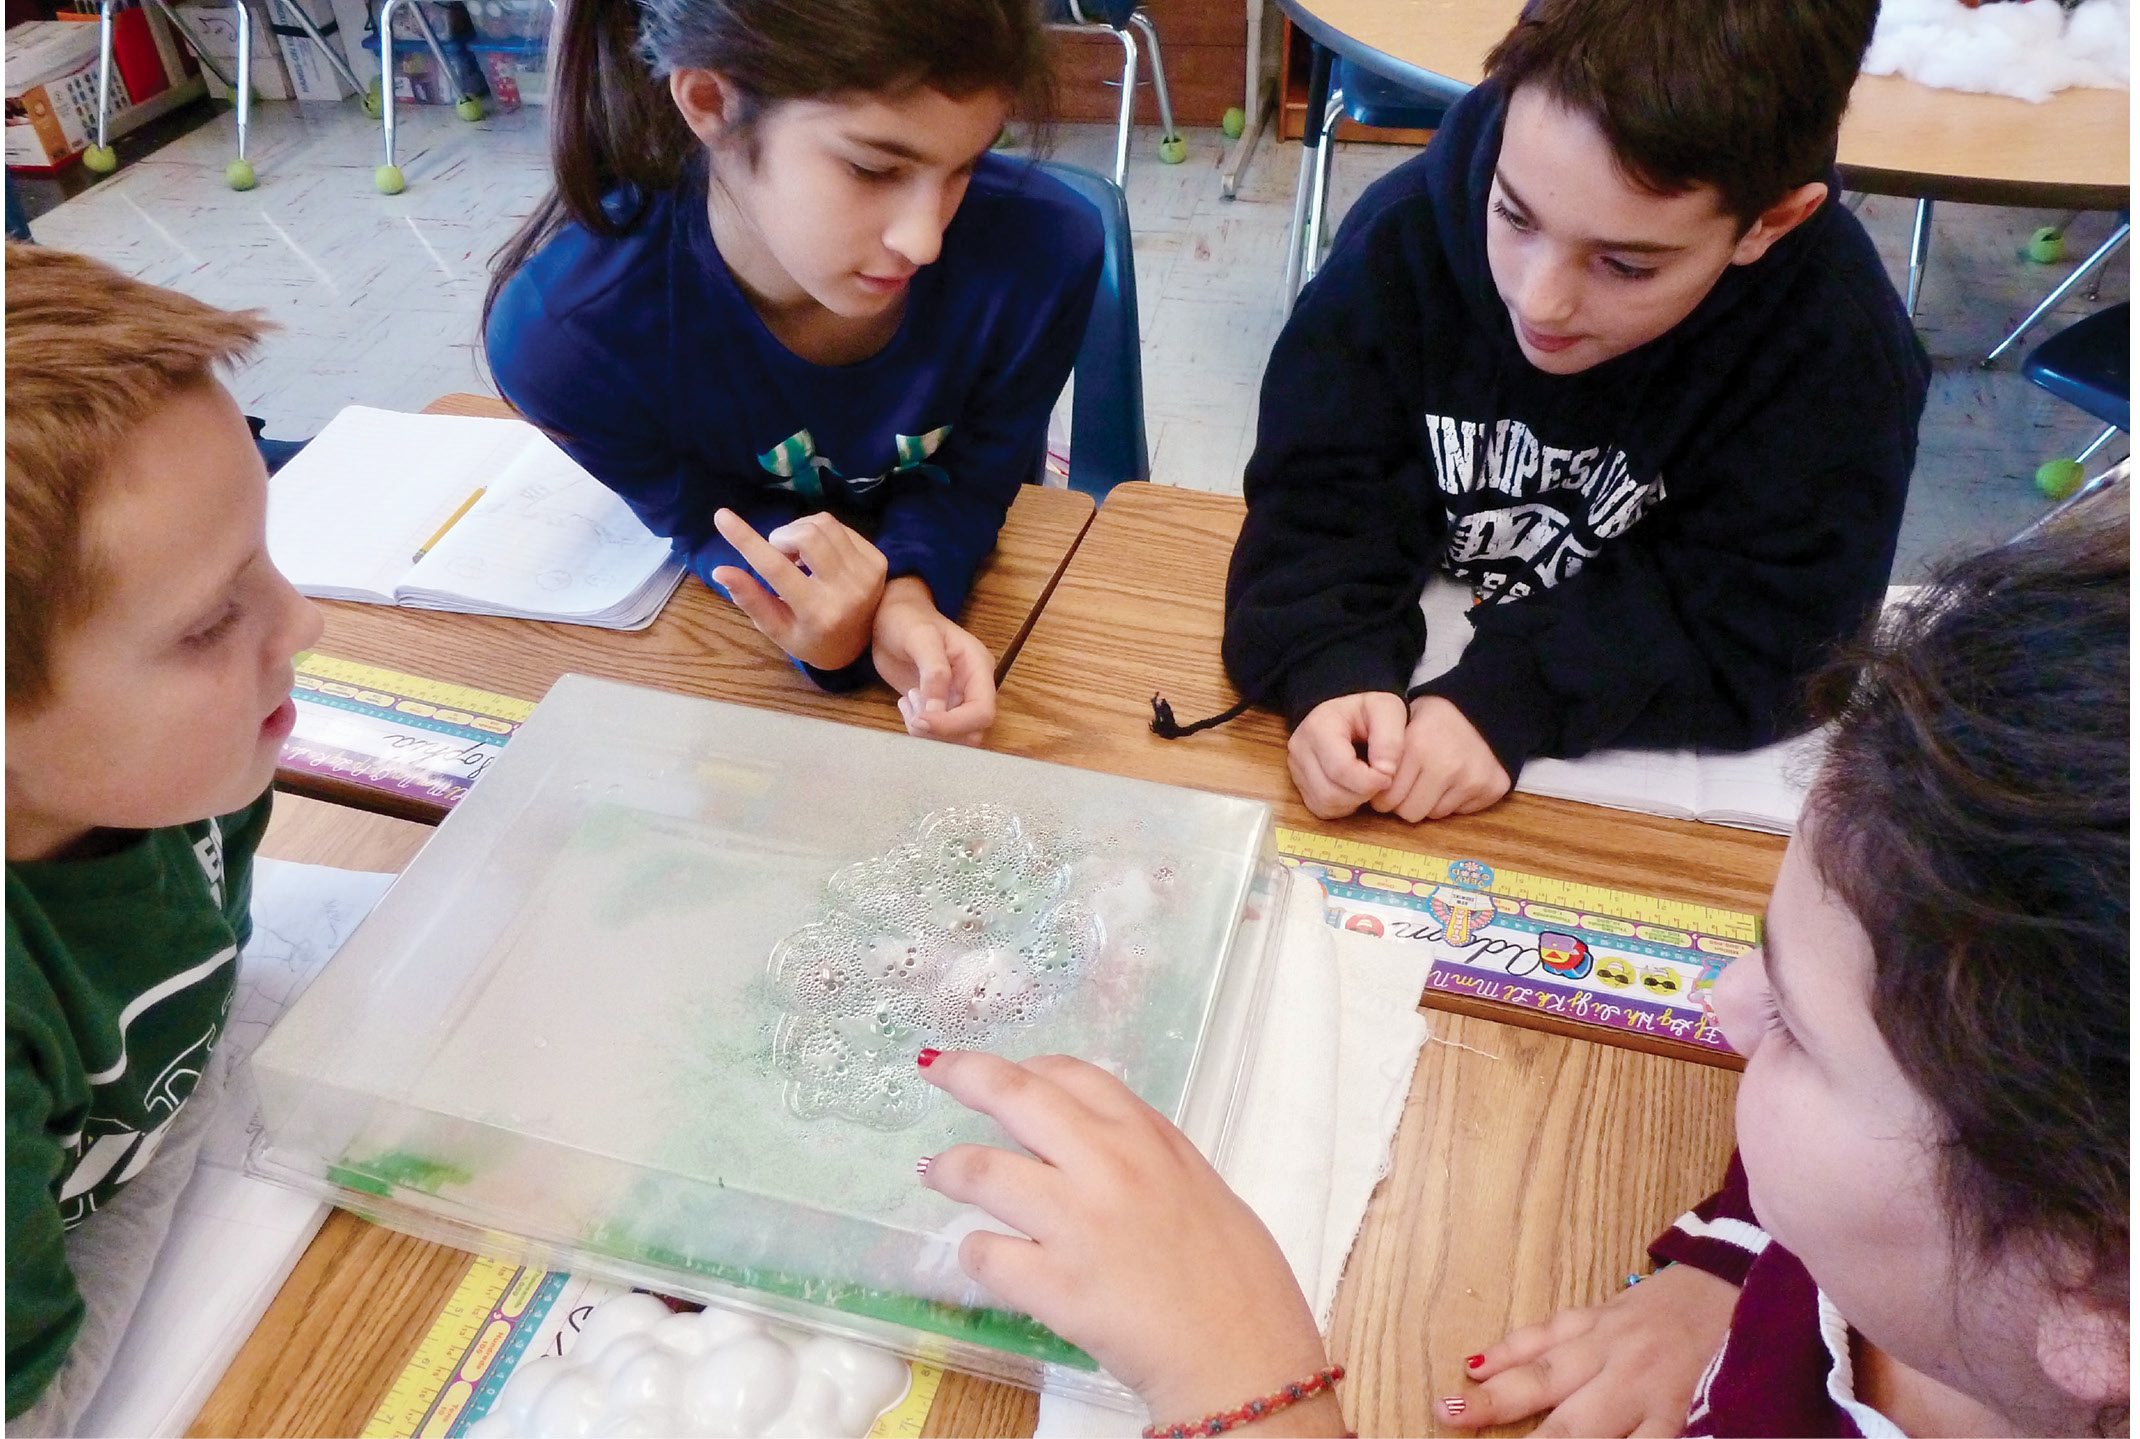 Students examine water cycle models and suggest ideas to explain the condensation.